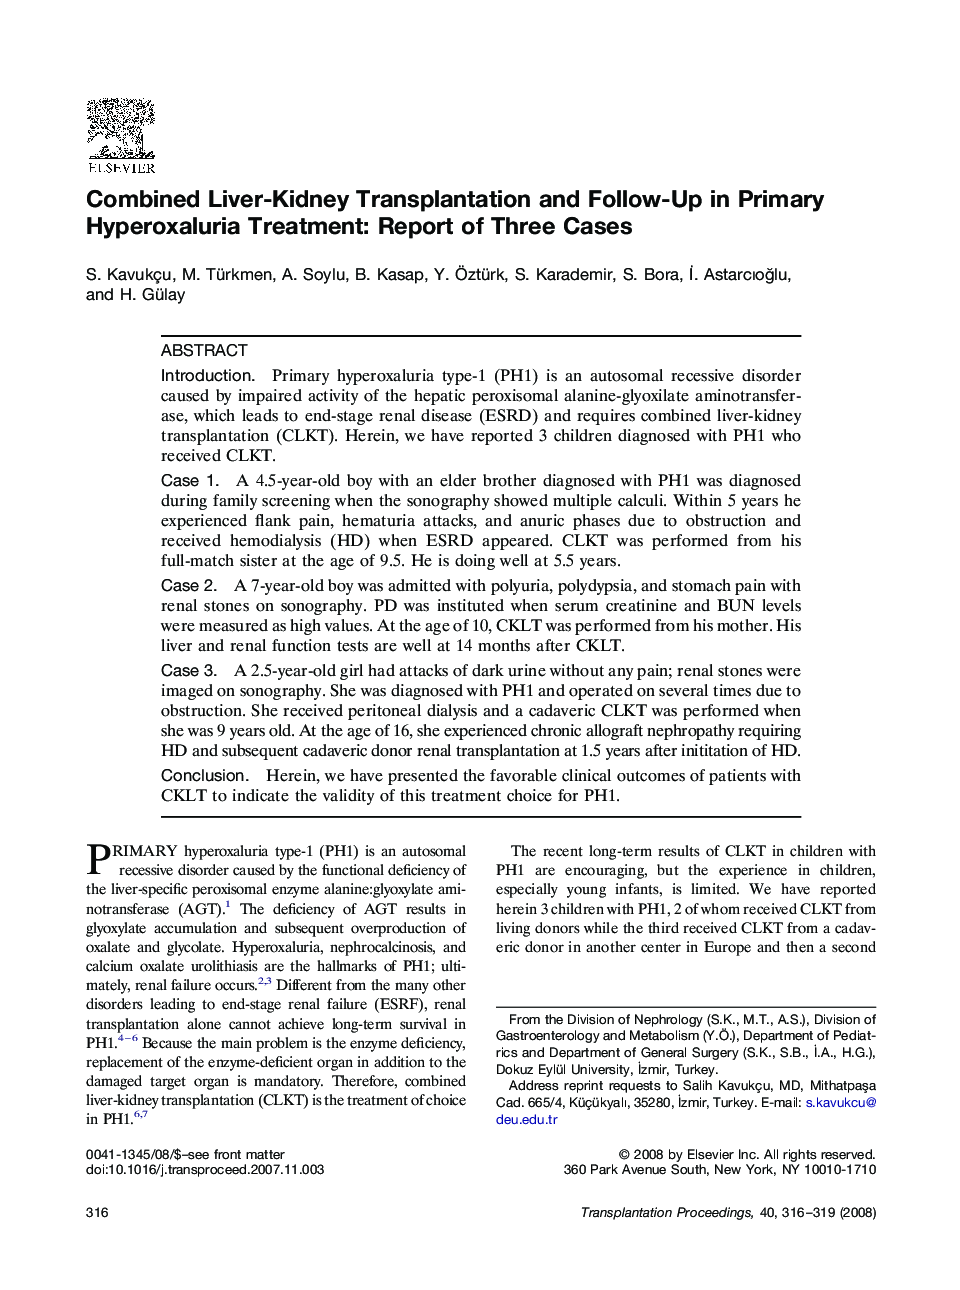 Combined Liver-Kidney Transplantation and Follow-Up in Primary Hyperoxaluria Treatment: Report of Three Cases